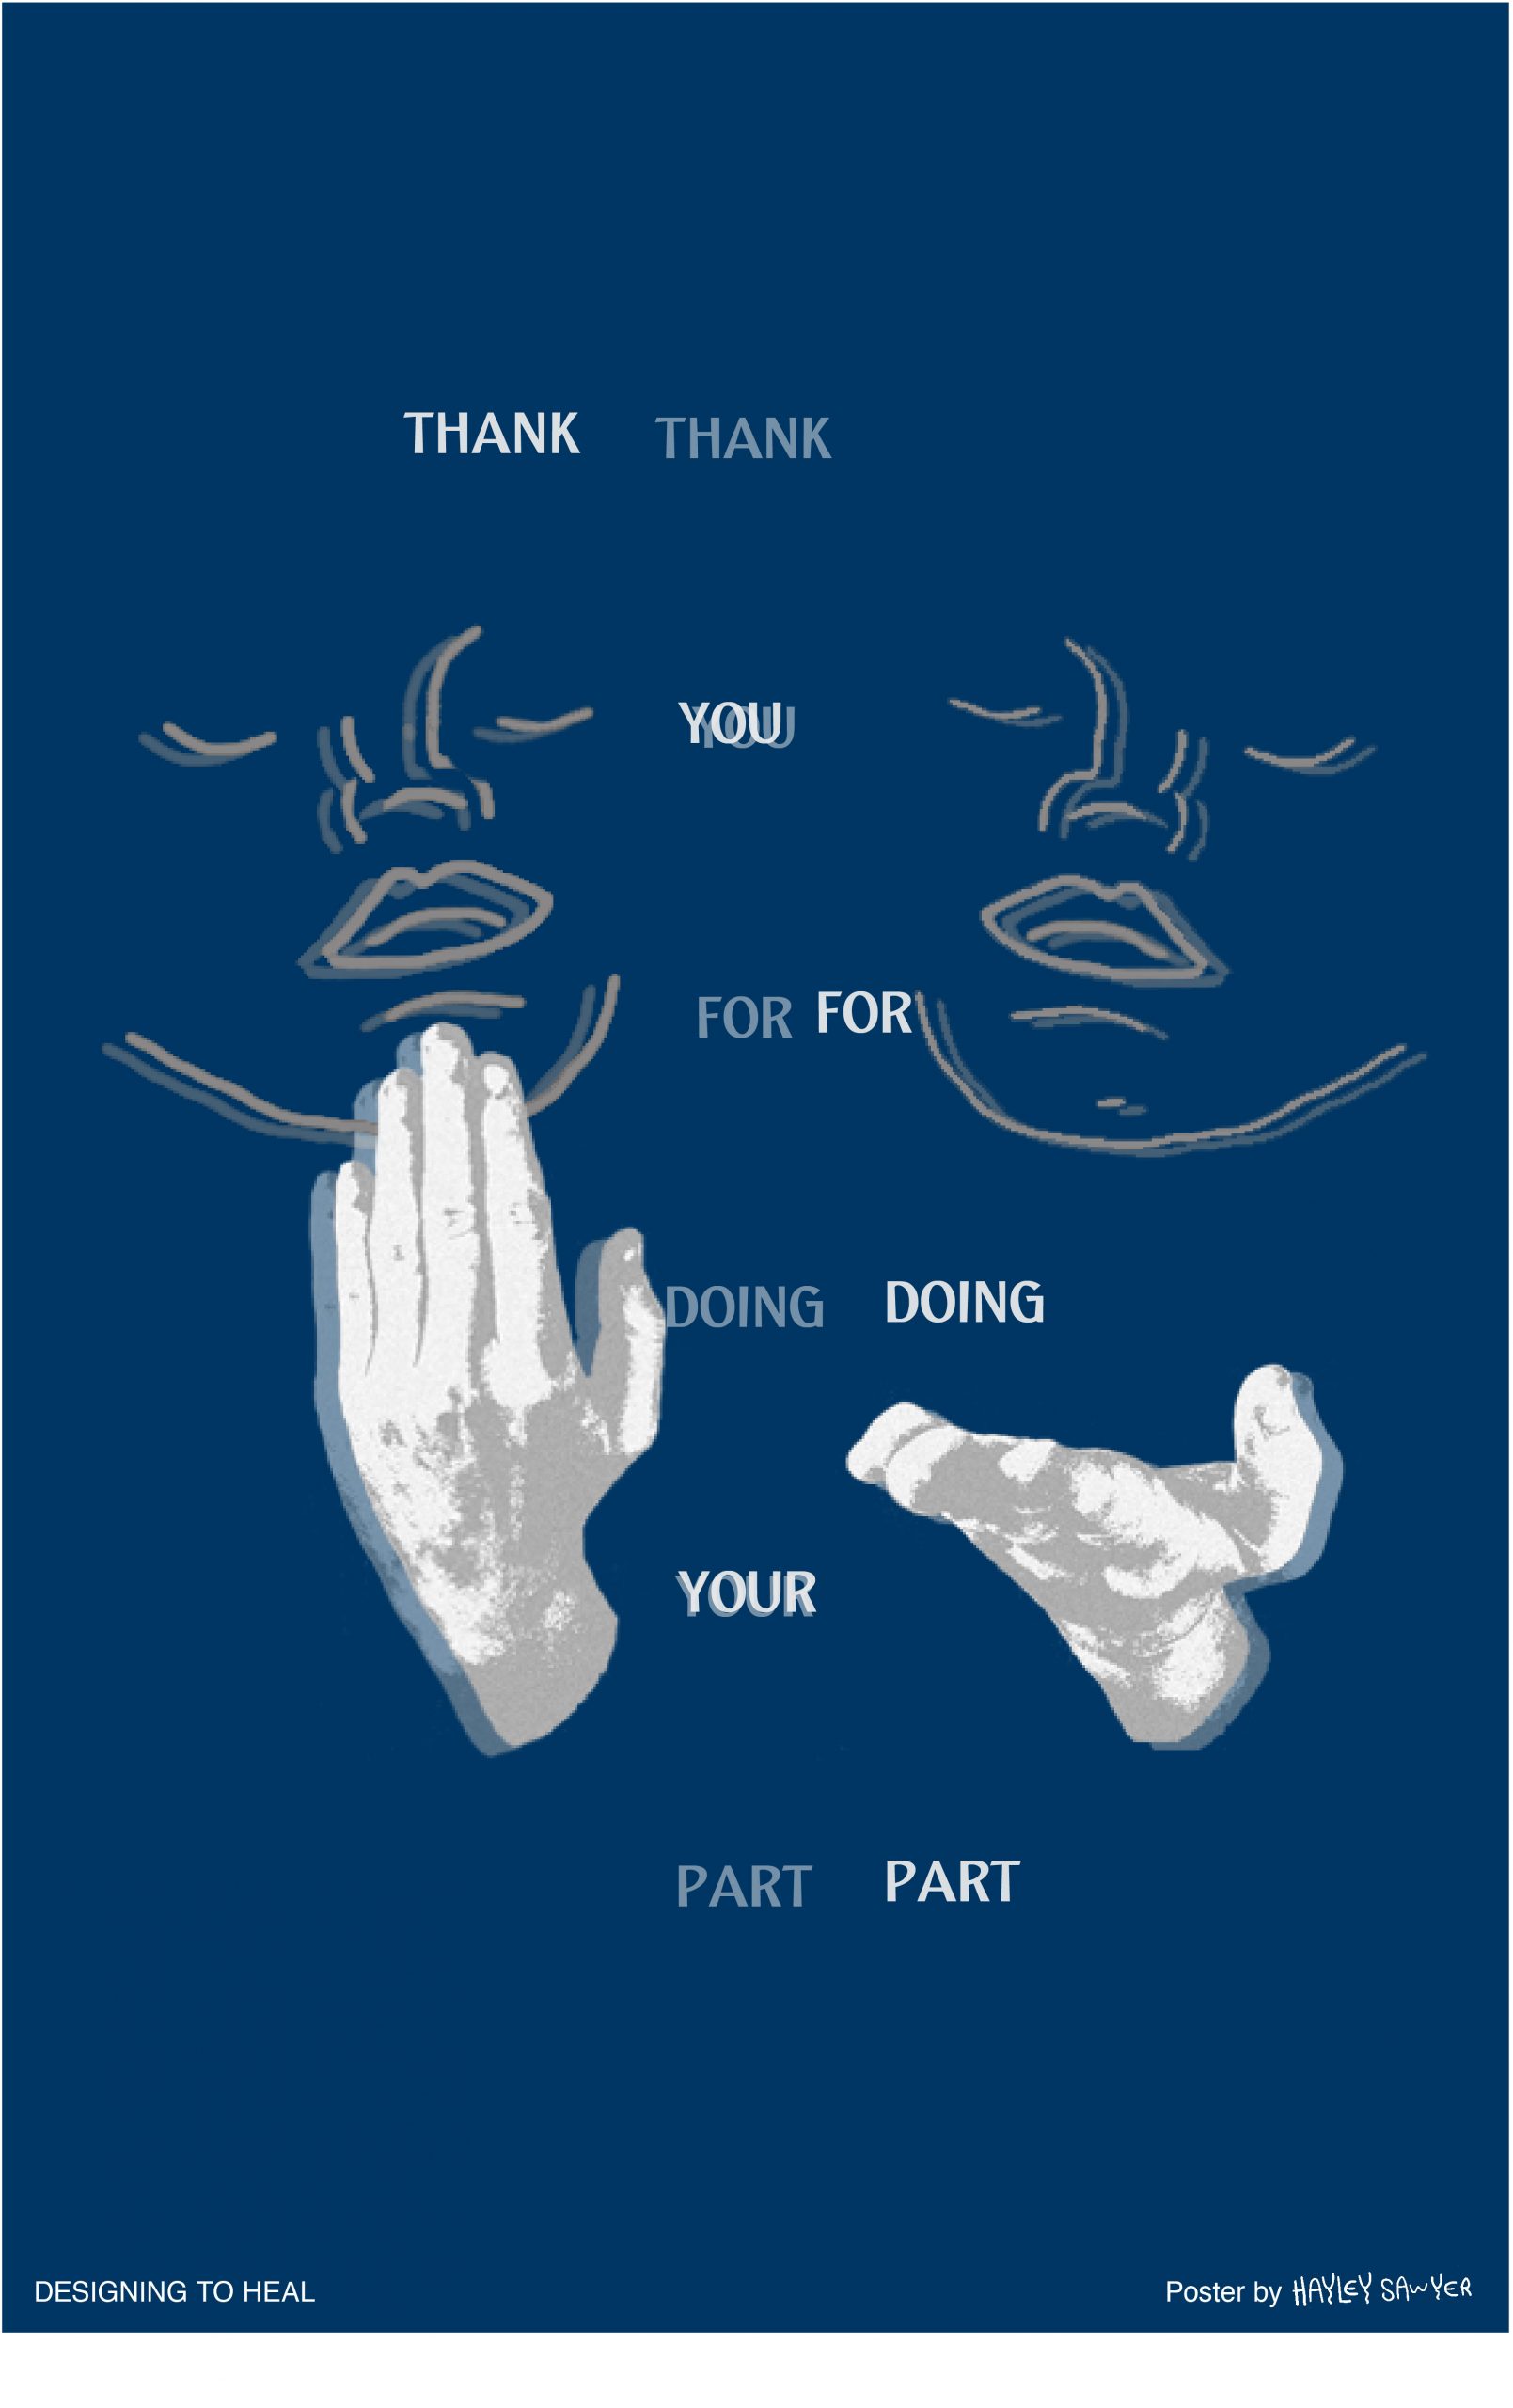 type-based PSA poster with text and ASL signing that thanks essential workers for doing their part